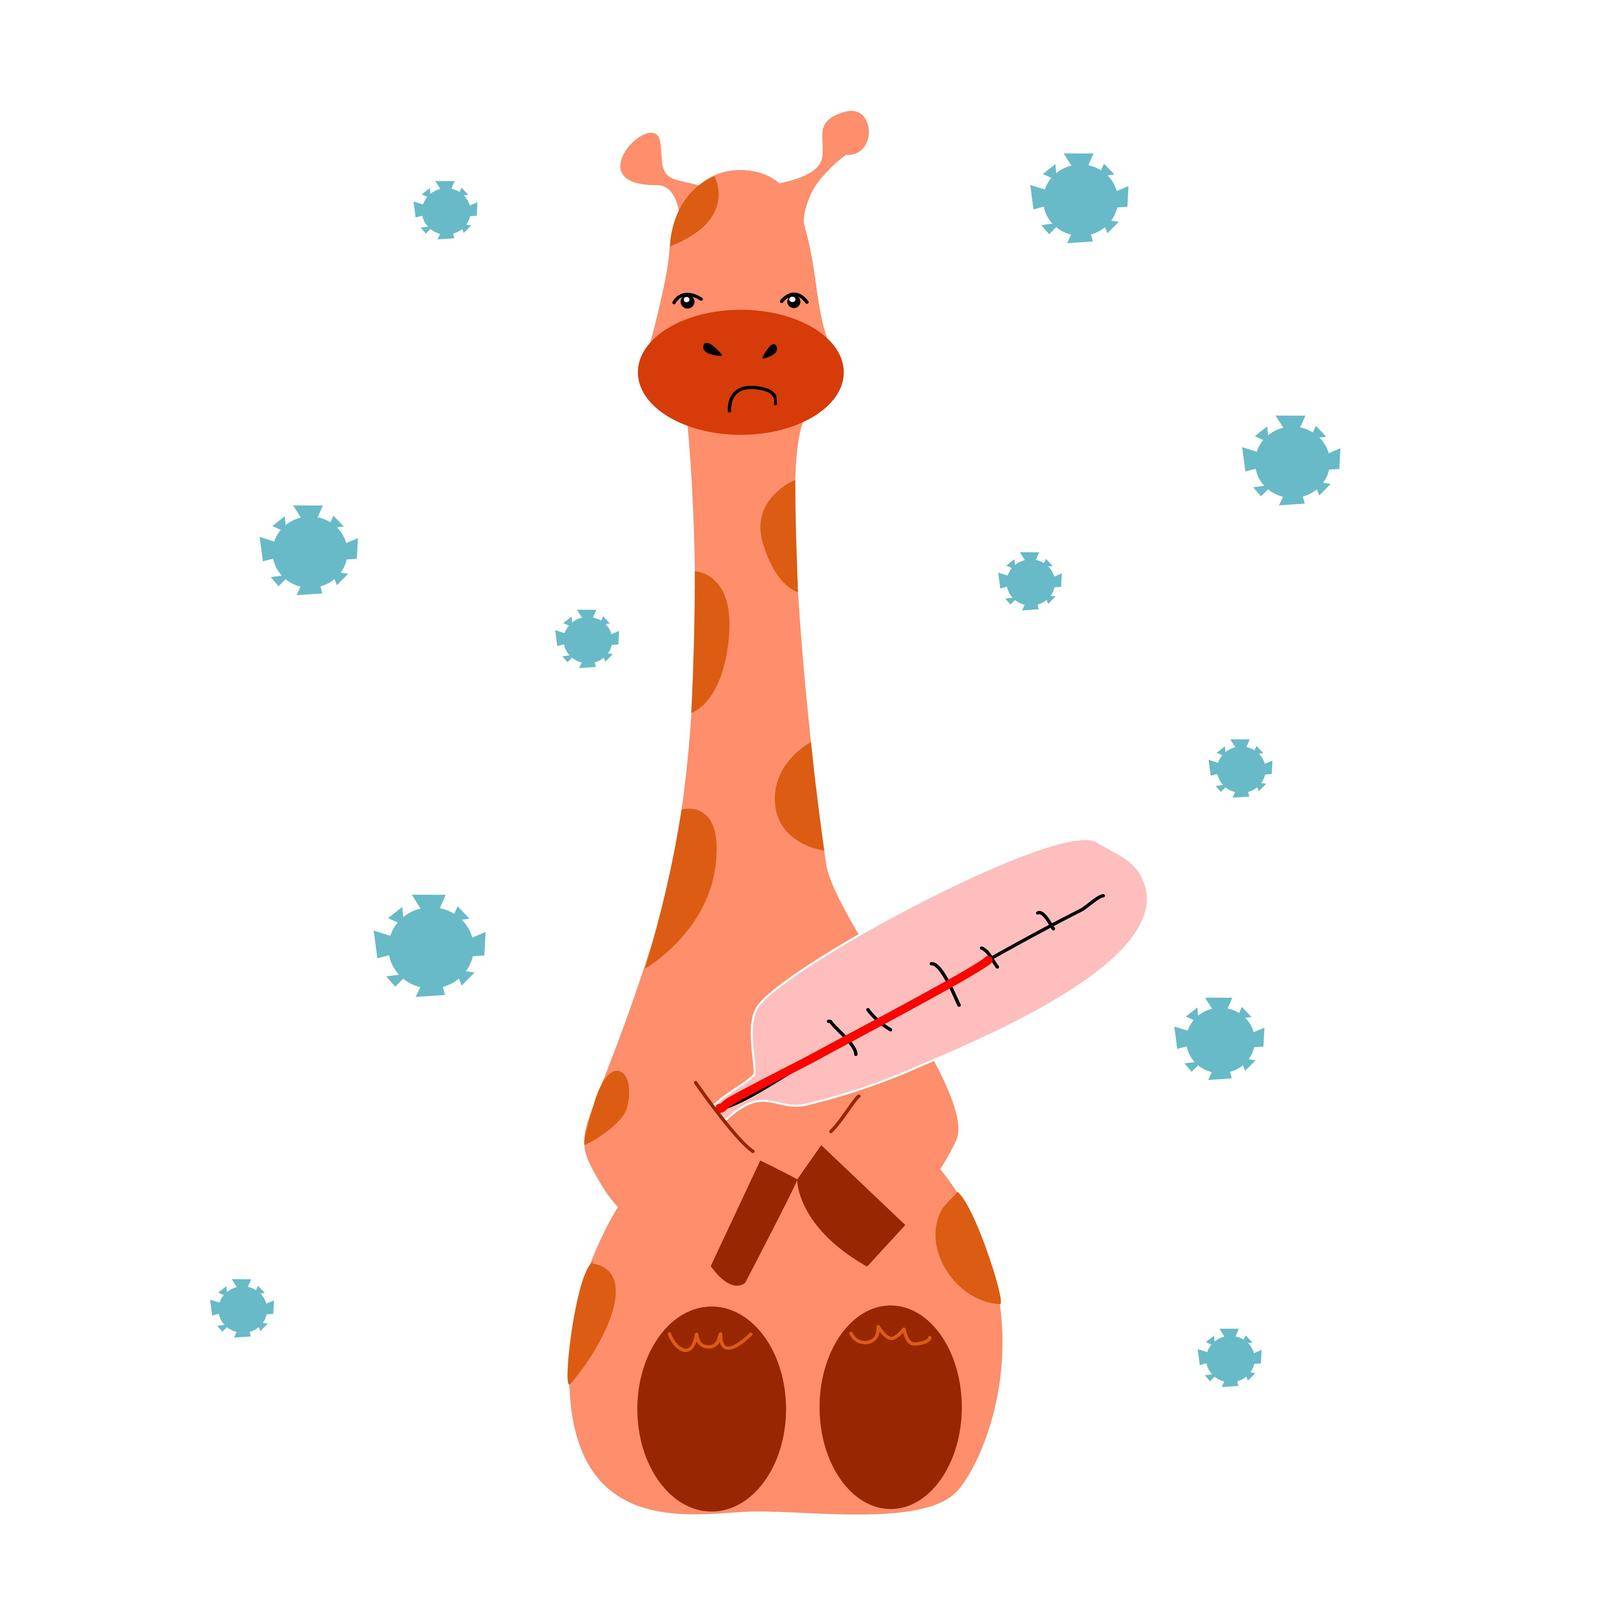 The giraffe is sick and measures the temperature with a thermometer. by EvgeniyaEgorova